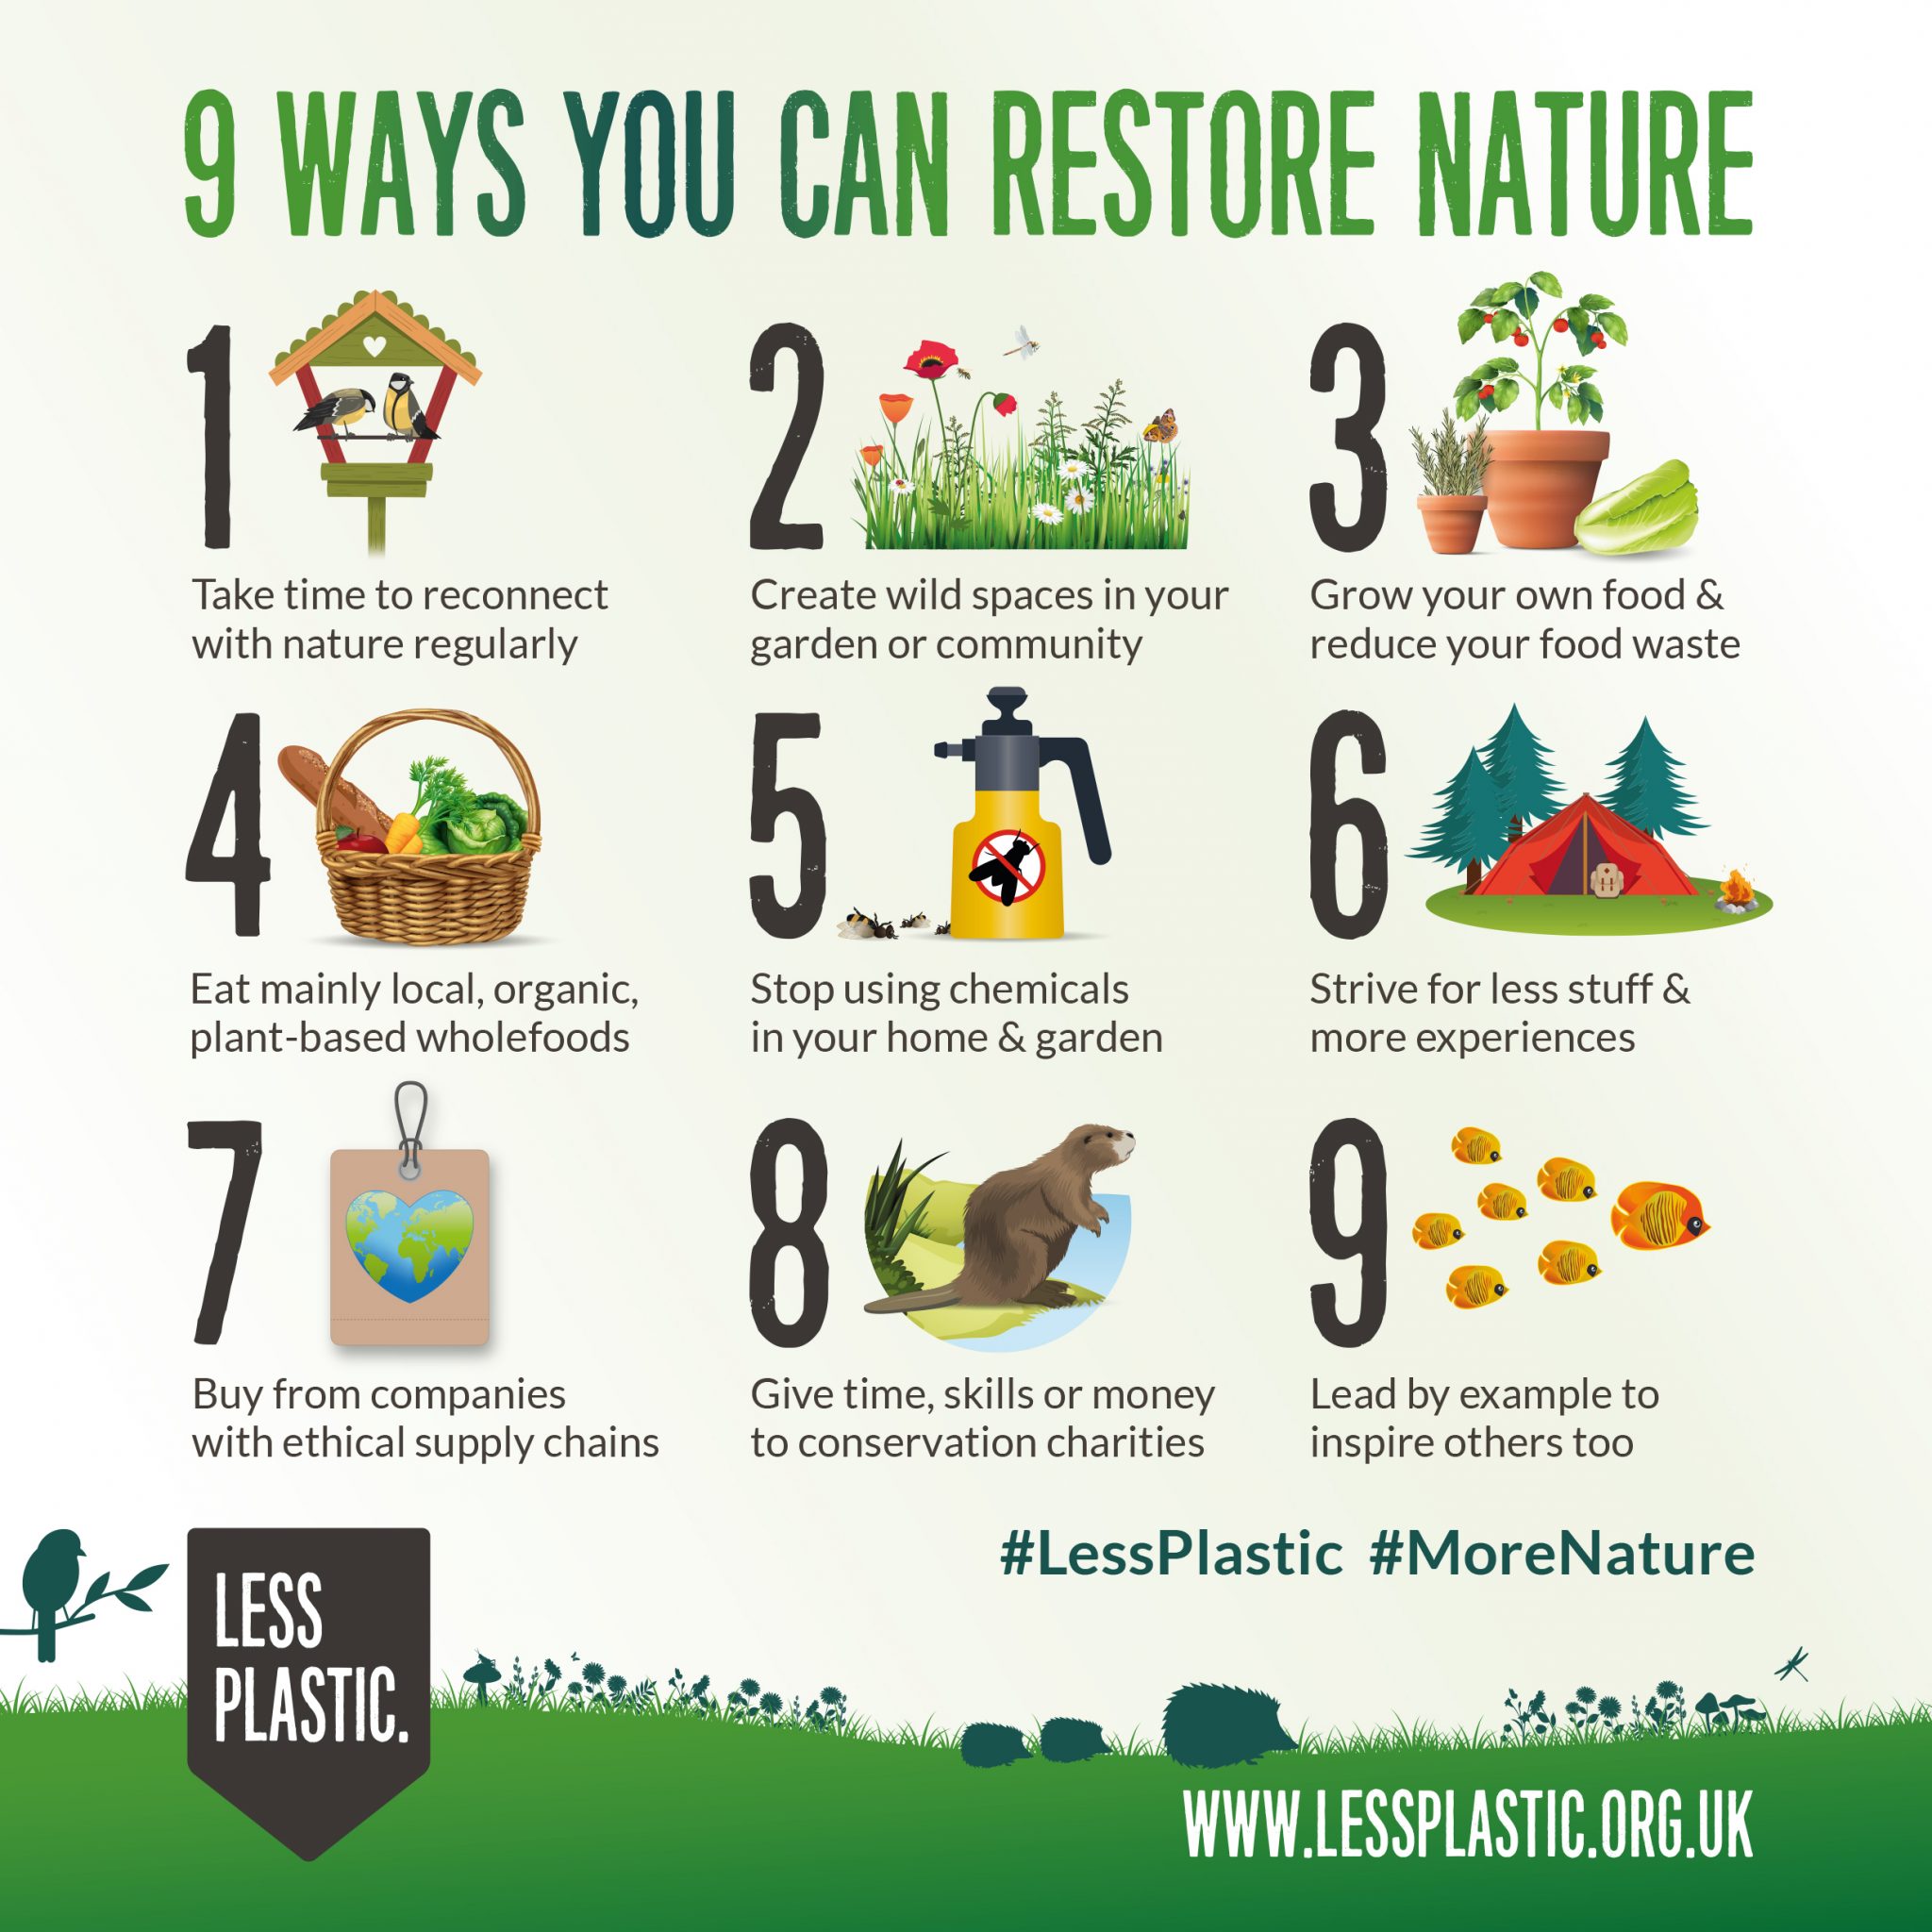 9 ways you can restore nature - Less Plastic